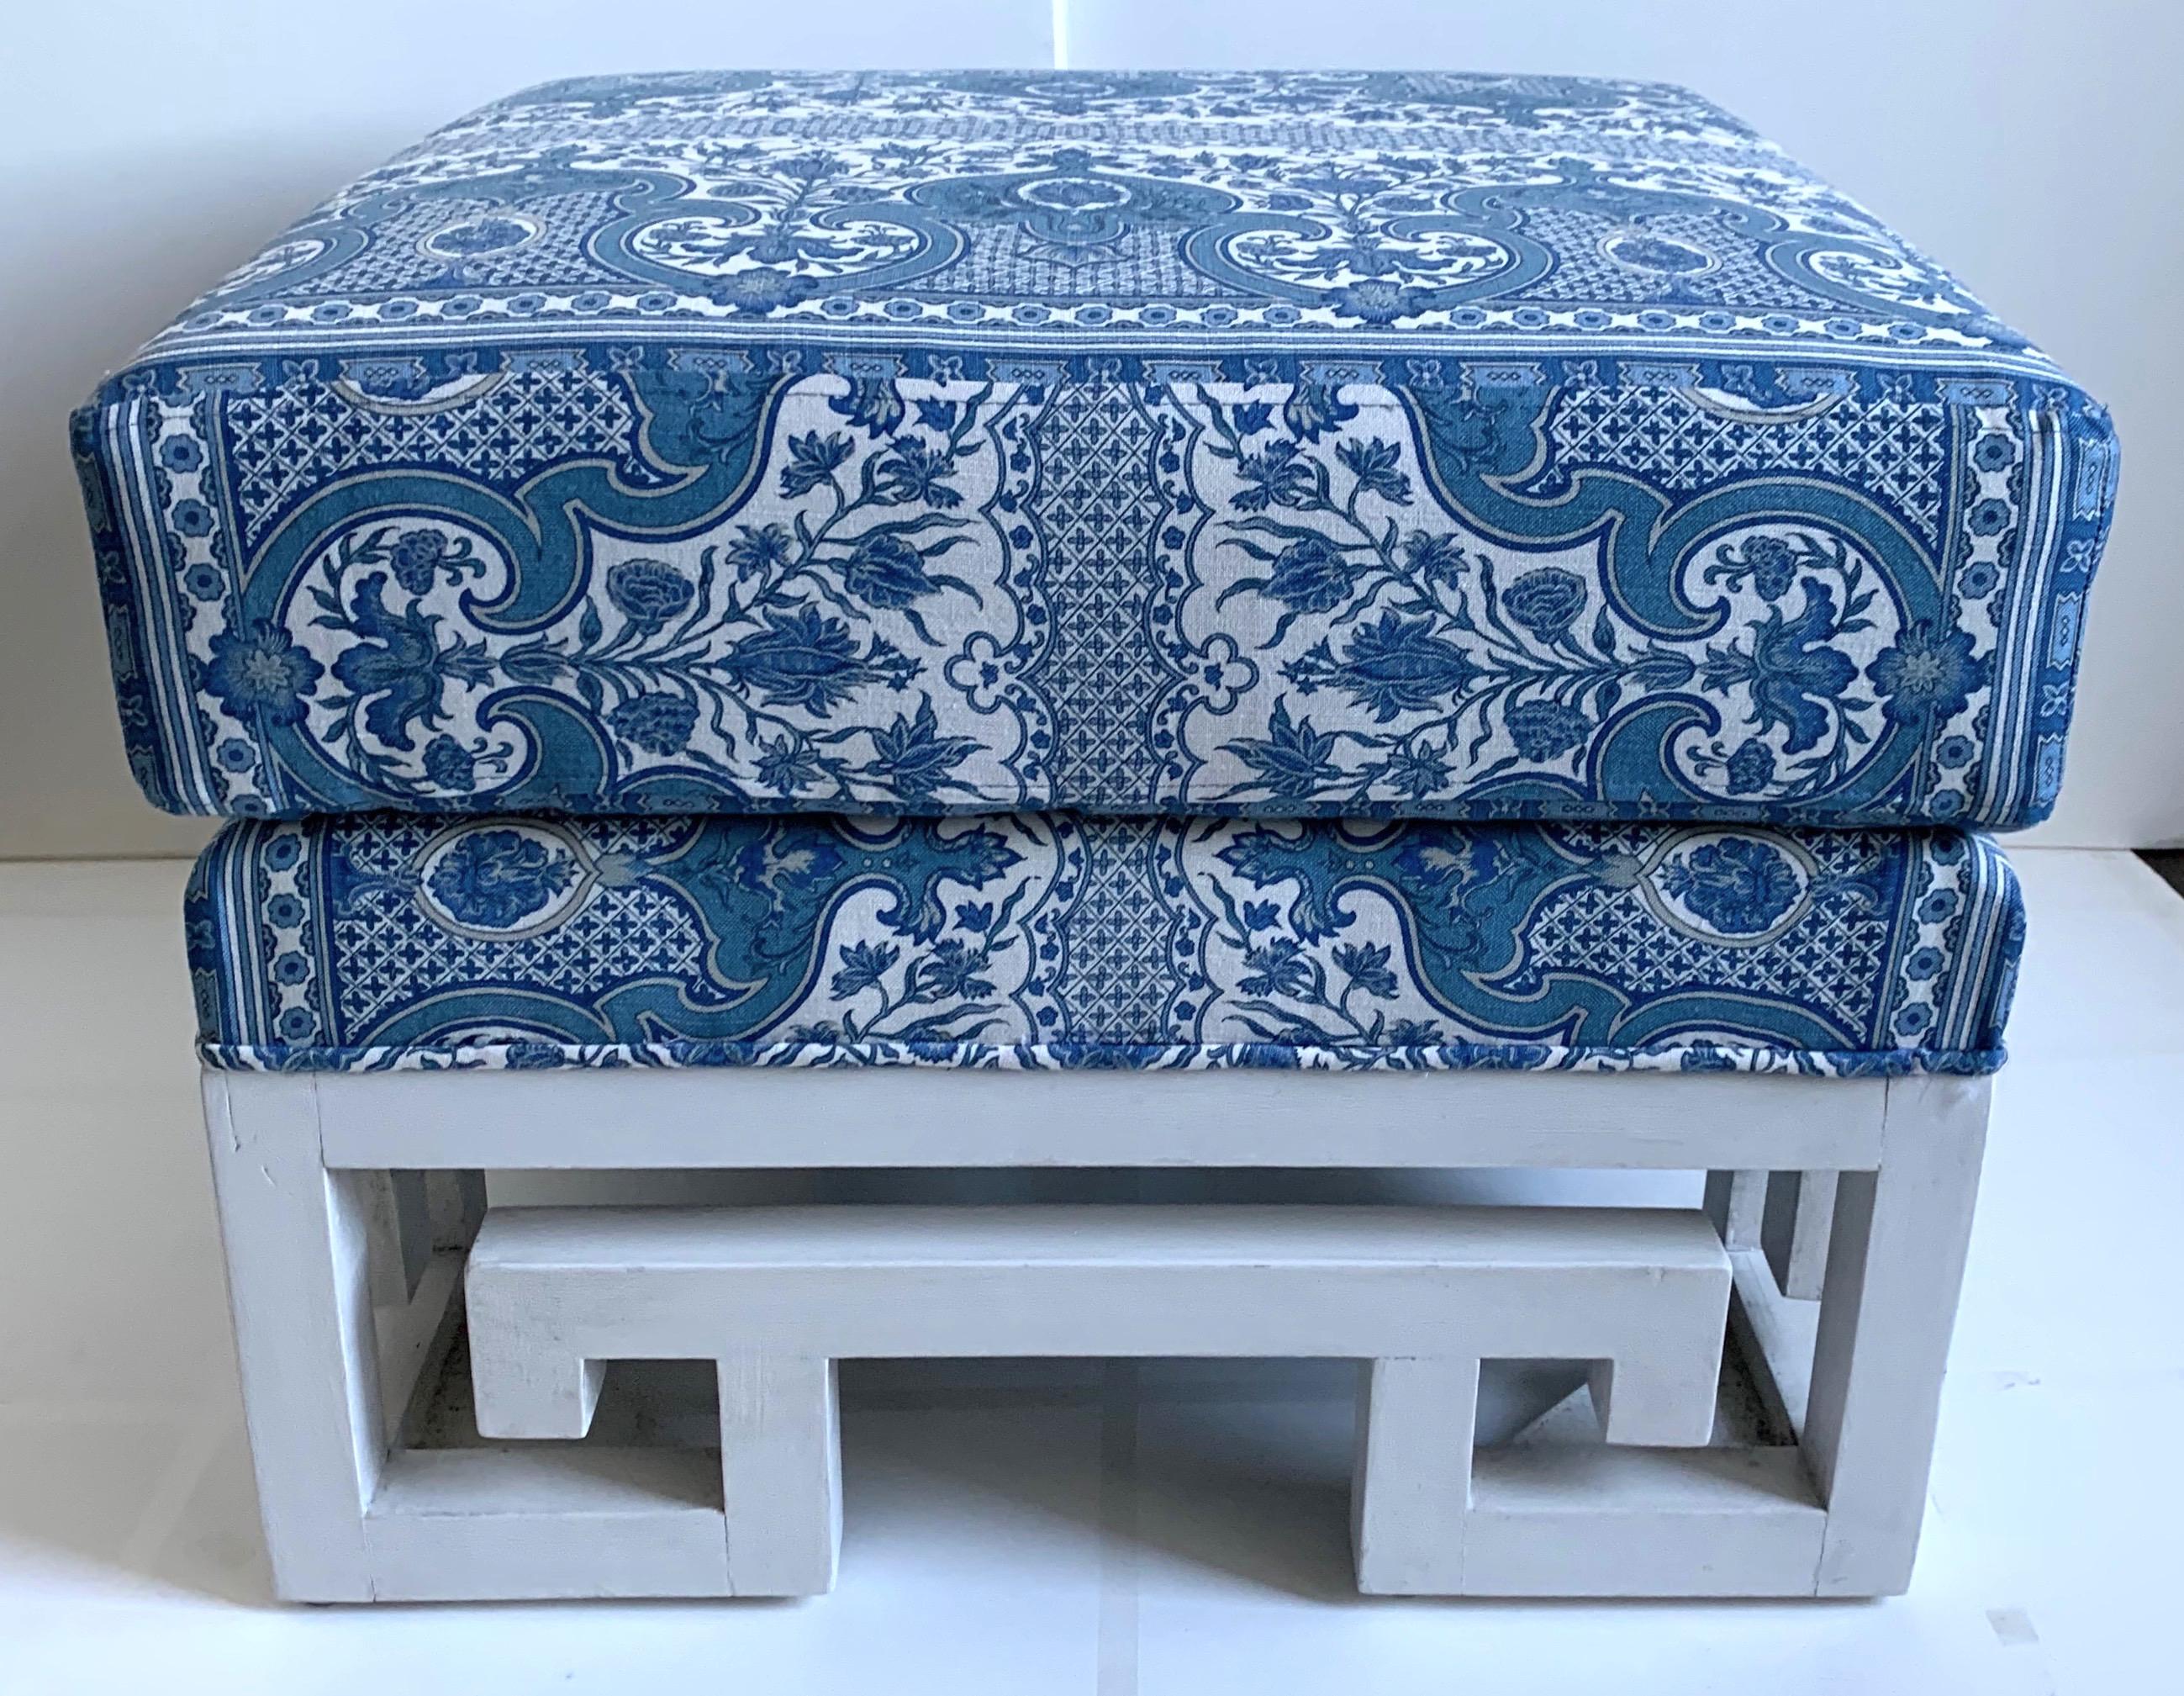 Pair of custom Greek key ottomans or stools. Newly repainted in an antique white finish. Custom designed with new fixed double stacked pillow cushions in Brunschwig & Fils Digby Tent printed blue linen. Base without cushion is 9” tall.